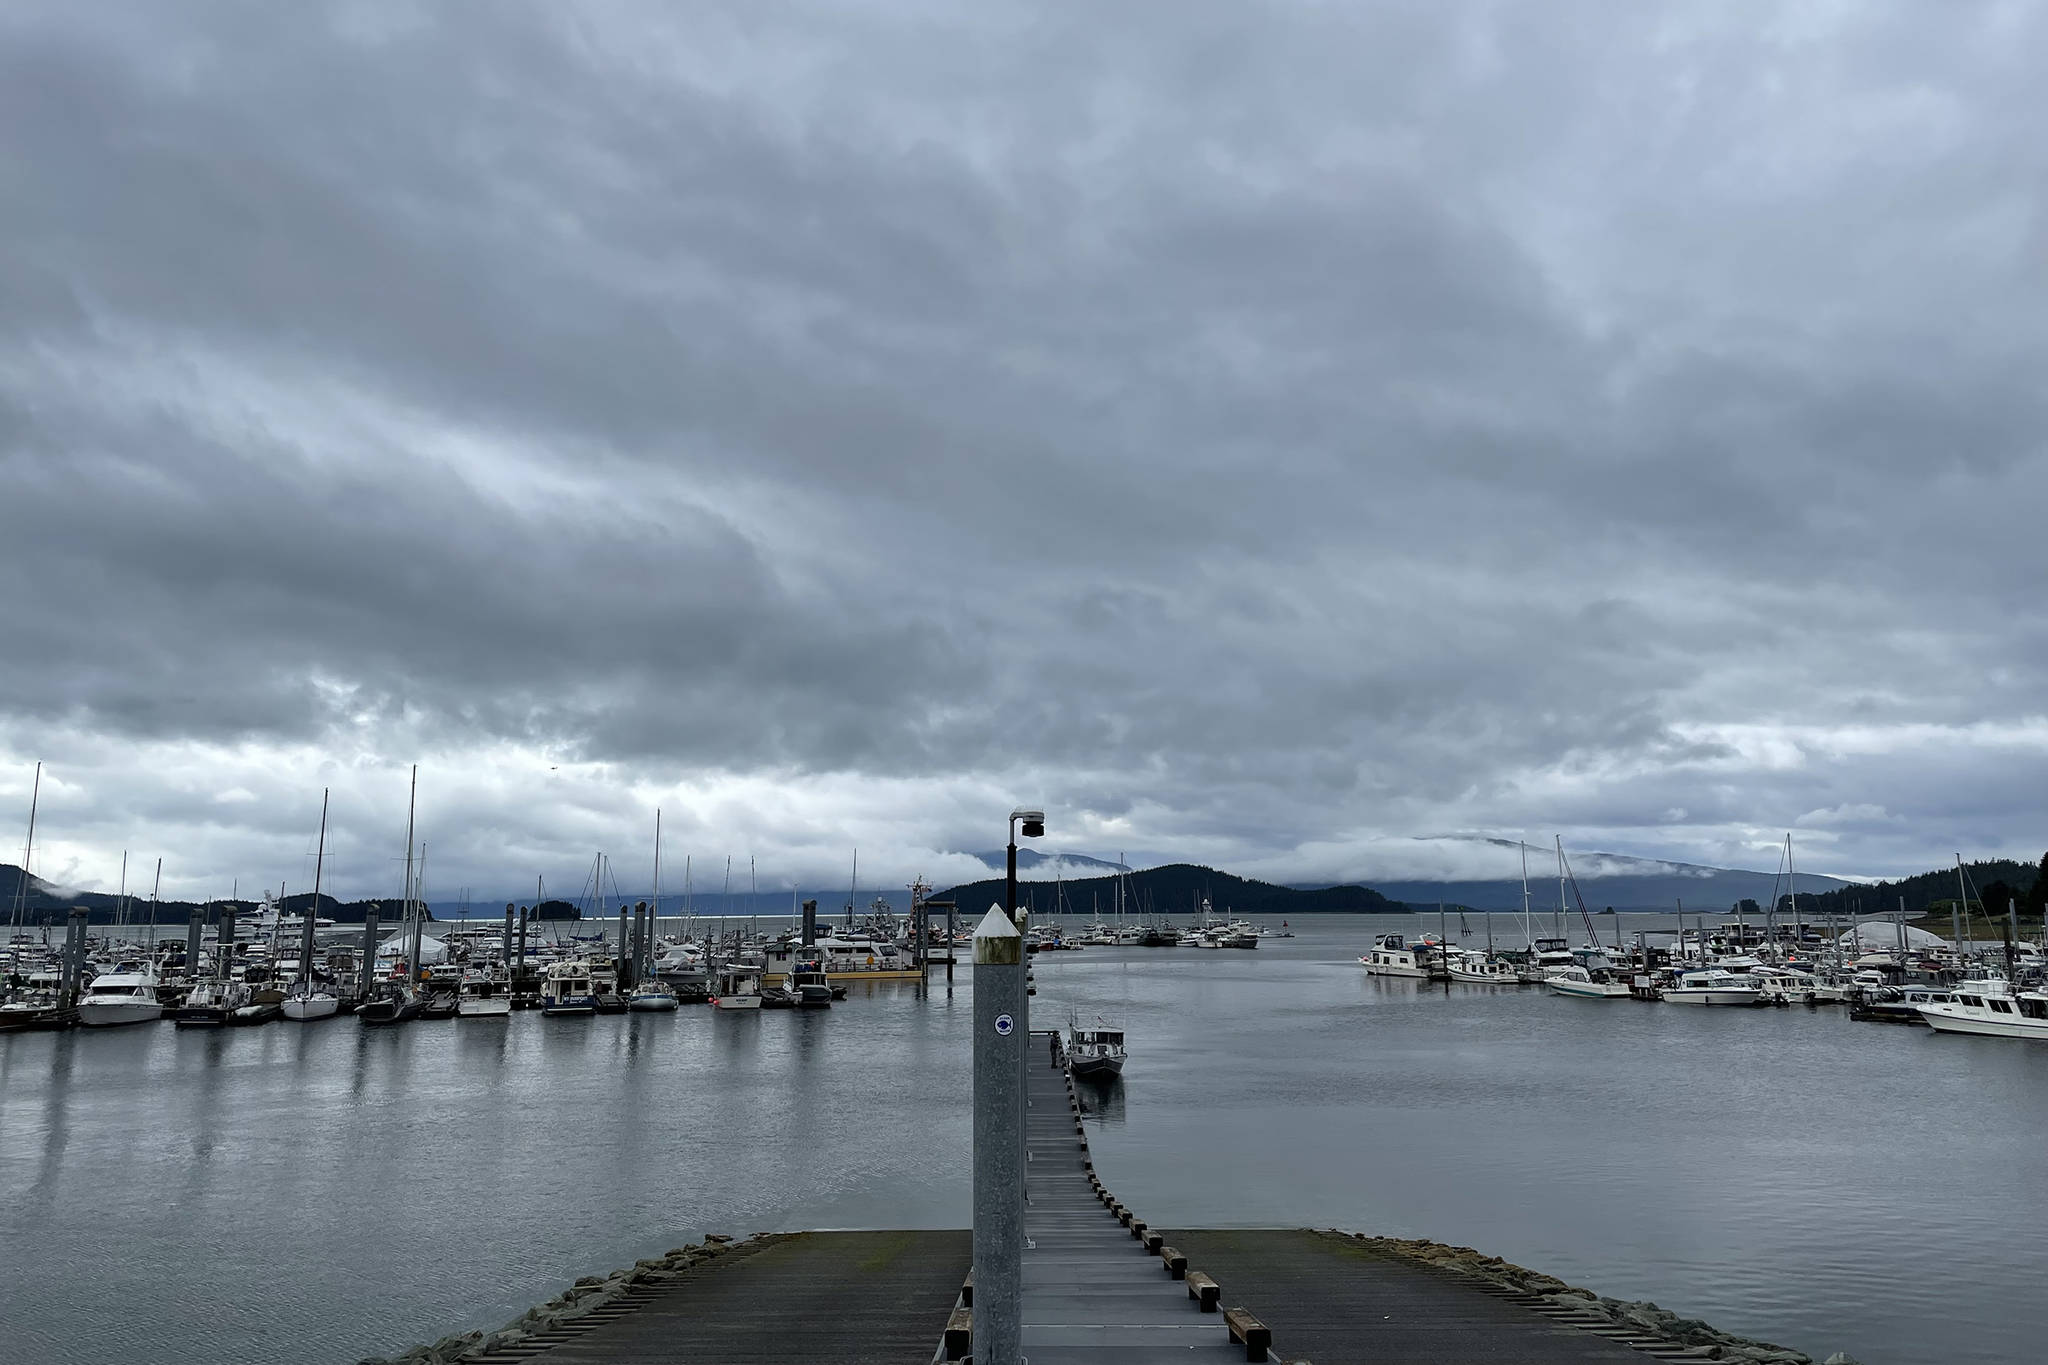 Michael S. Lockett / Juneau Empire 
With heavy rains predicted, City and Borough of Juneau Docks and Harbors asked boat owners to check on their vessels. The National Weather Service issued a flood watch, which may be upgraded to a warning, in light of the expected weather.